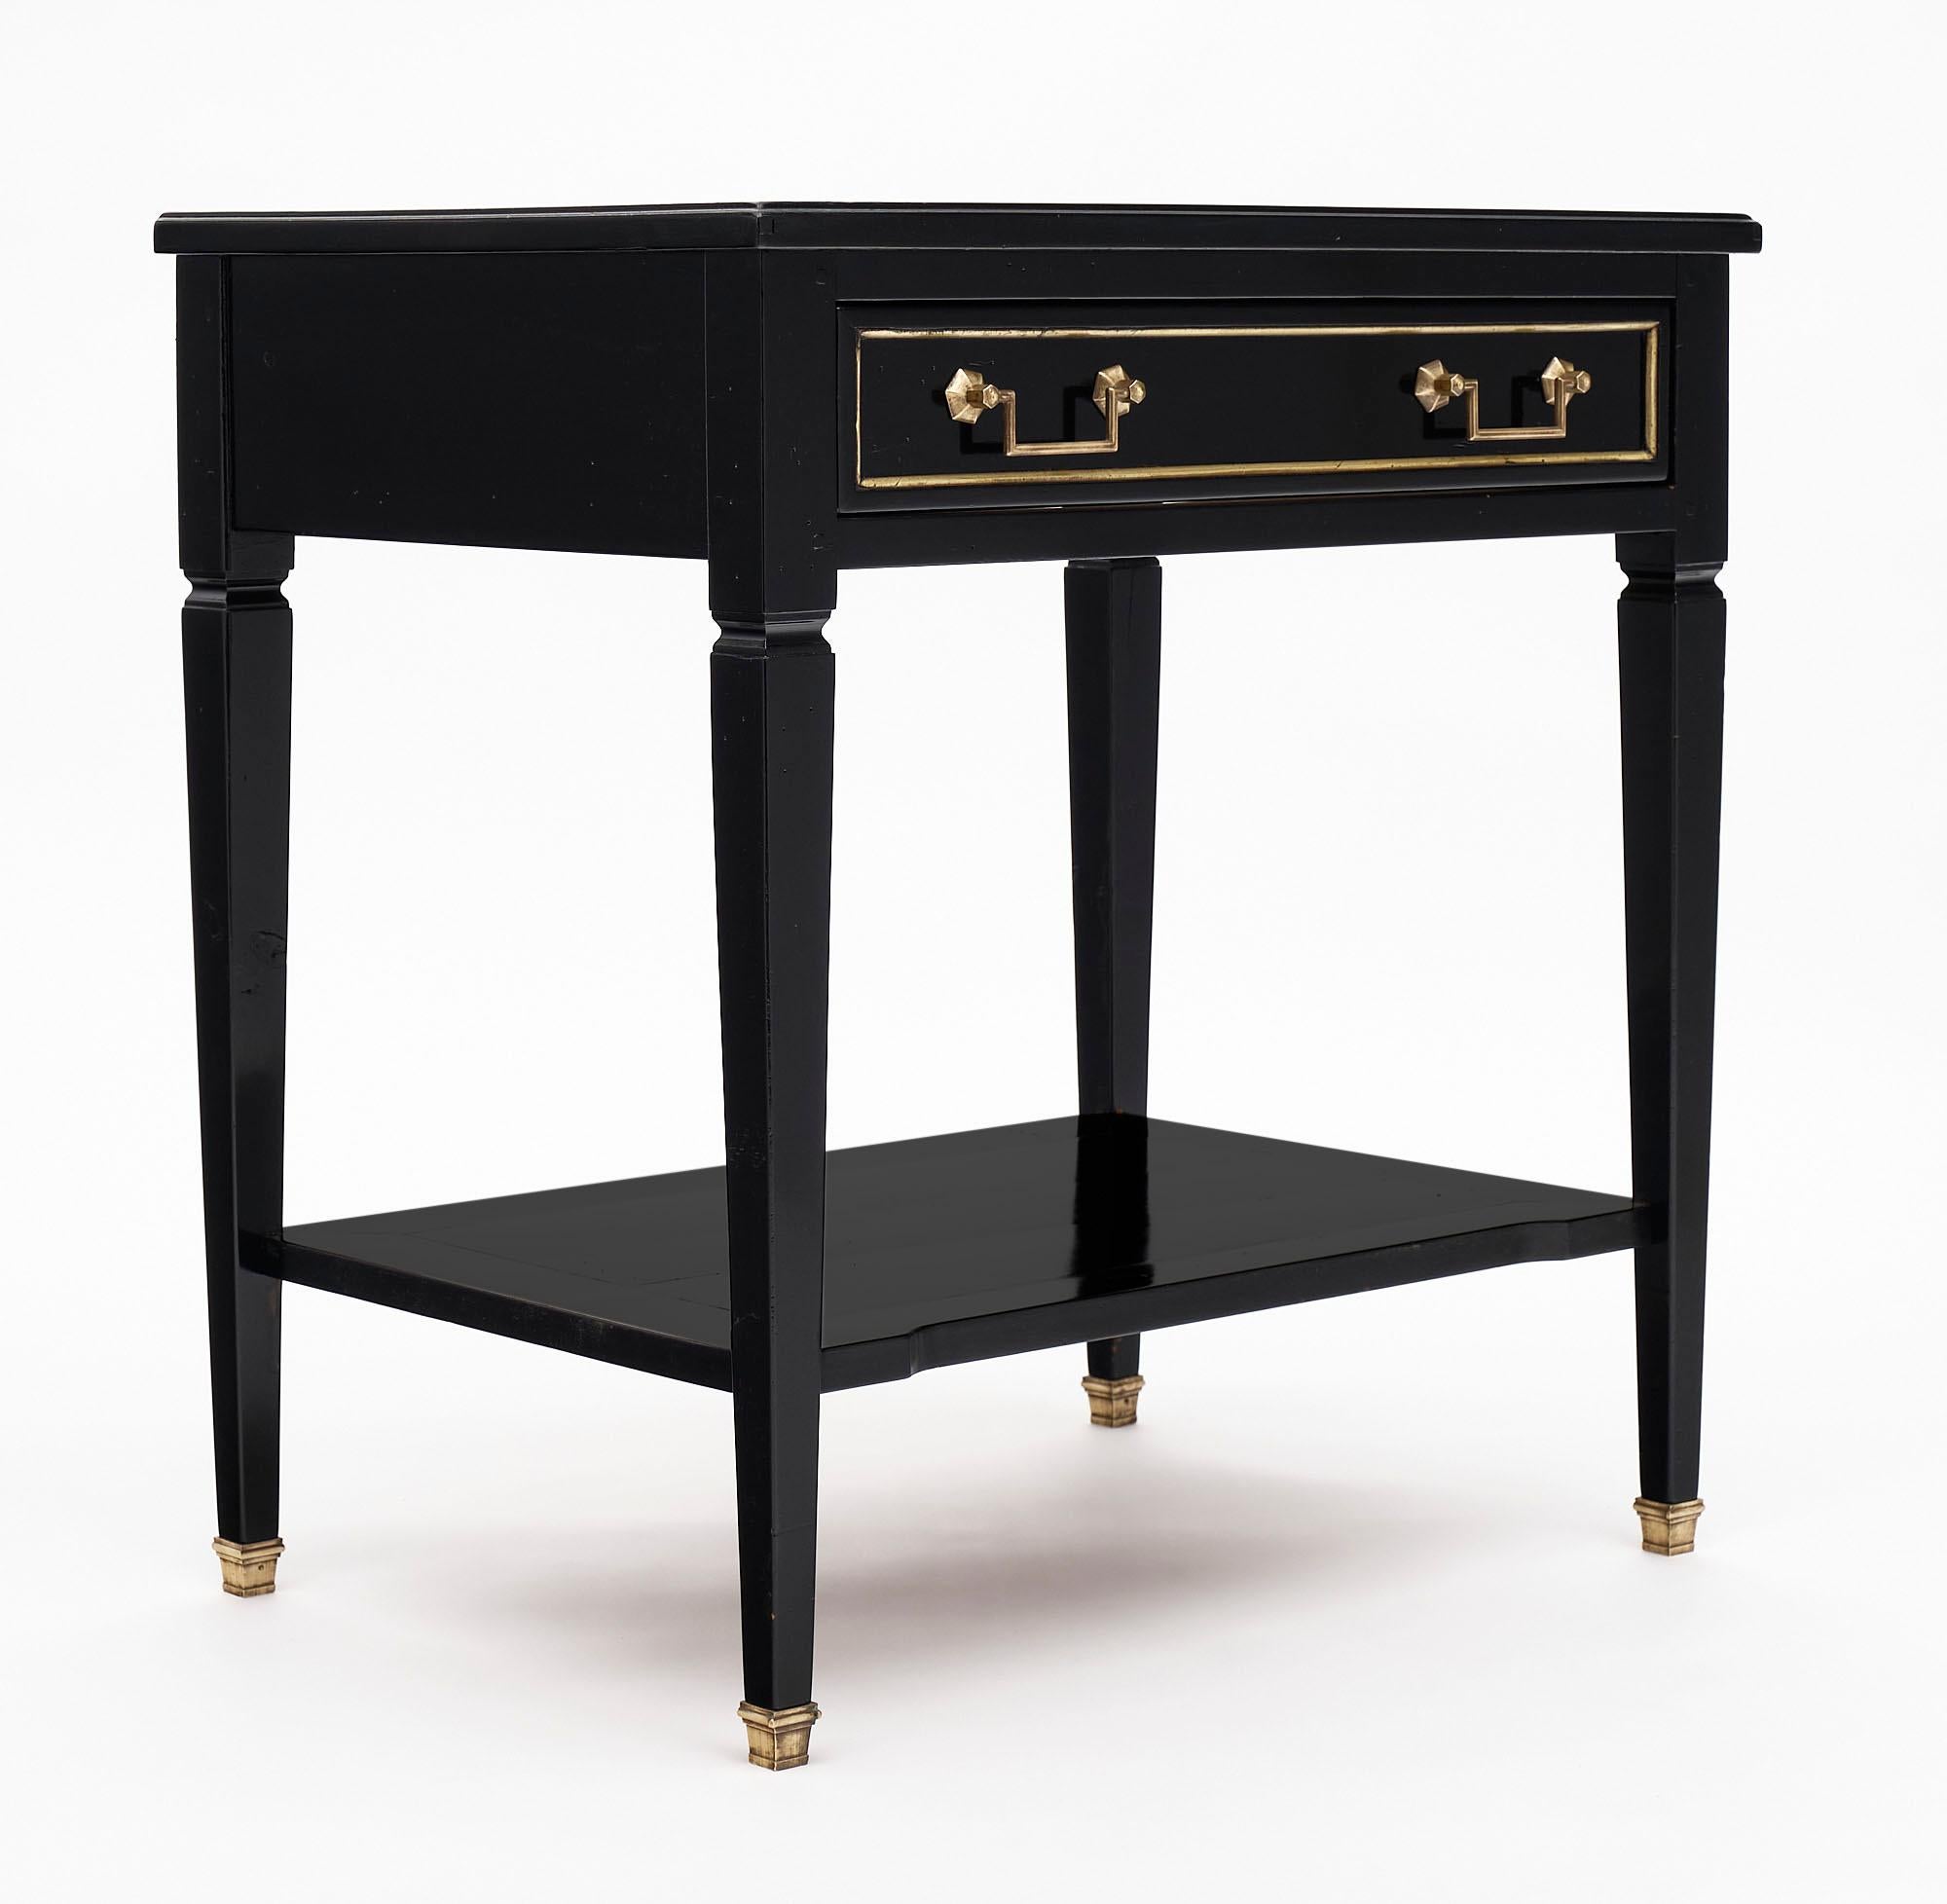 Louis XVI style side table or console made of solid cherry wood that has been finished with an ebony lustrous French polish. There is one dovetailed drawer with bronze hardware and a lower shelf.